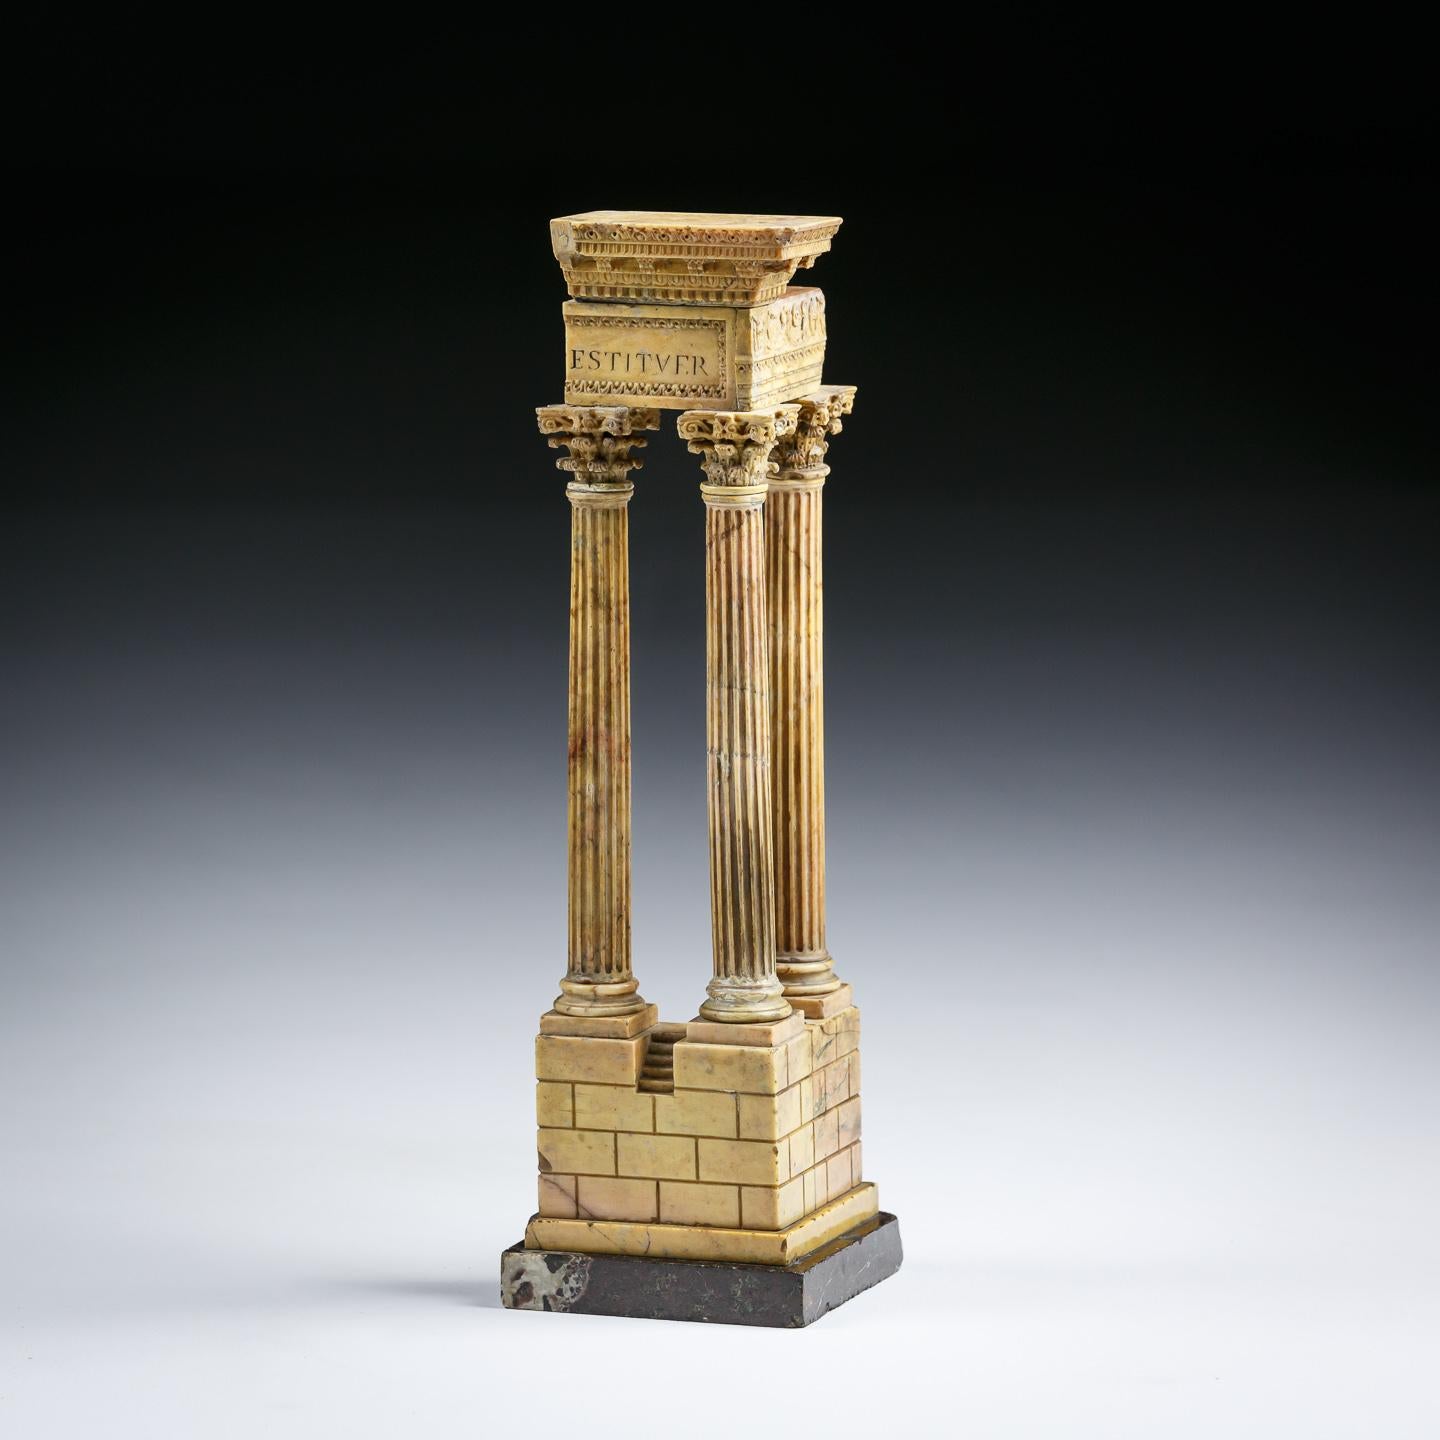 Exceptional quality grand tour Giallo Antico Marble model of The Temple of Vespasian. Vatican Workshops.
Minor blemishes and some restoration. Sound solid condition.
circa 1820.